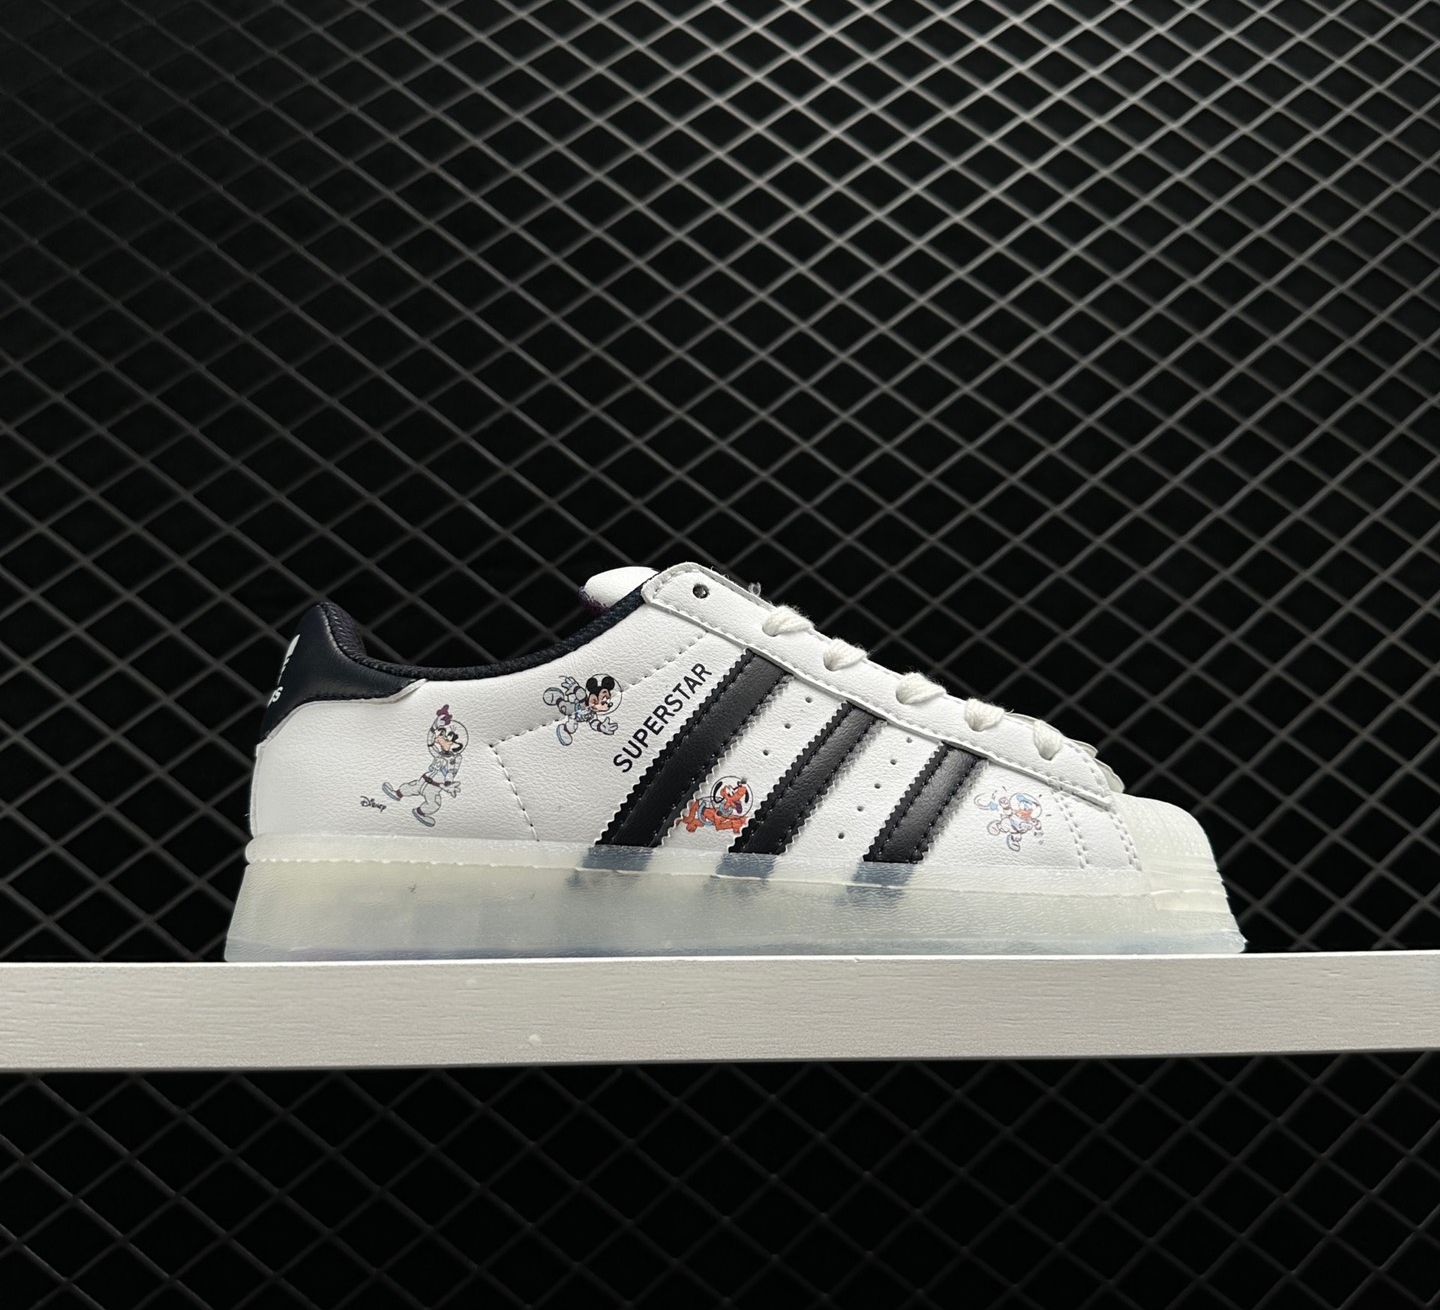 Adidas Superstar X Disney Shoes White HQ2175 - Iconic collaboration with Disney | Free Shipping